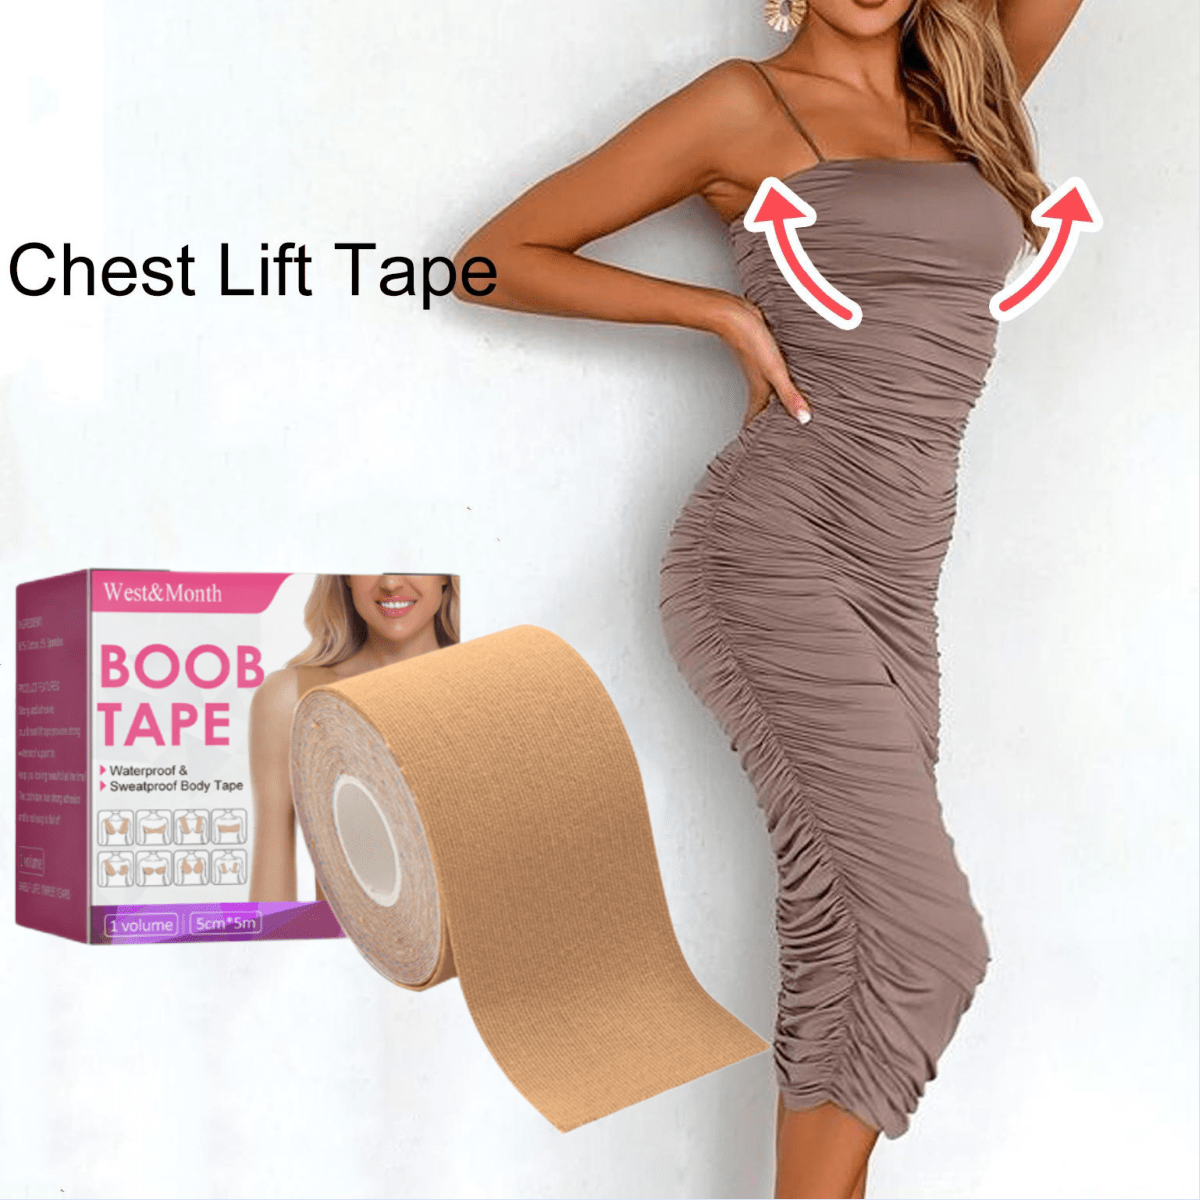 Boob Tape, Boobytape for Breast Lift, Achieve Lift & Contour of Breasts, Sticky Athletic Tape for Push up & Shape in All Clothing Fabric Dress Types